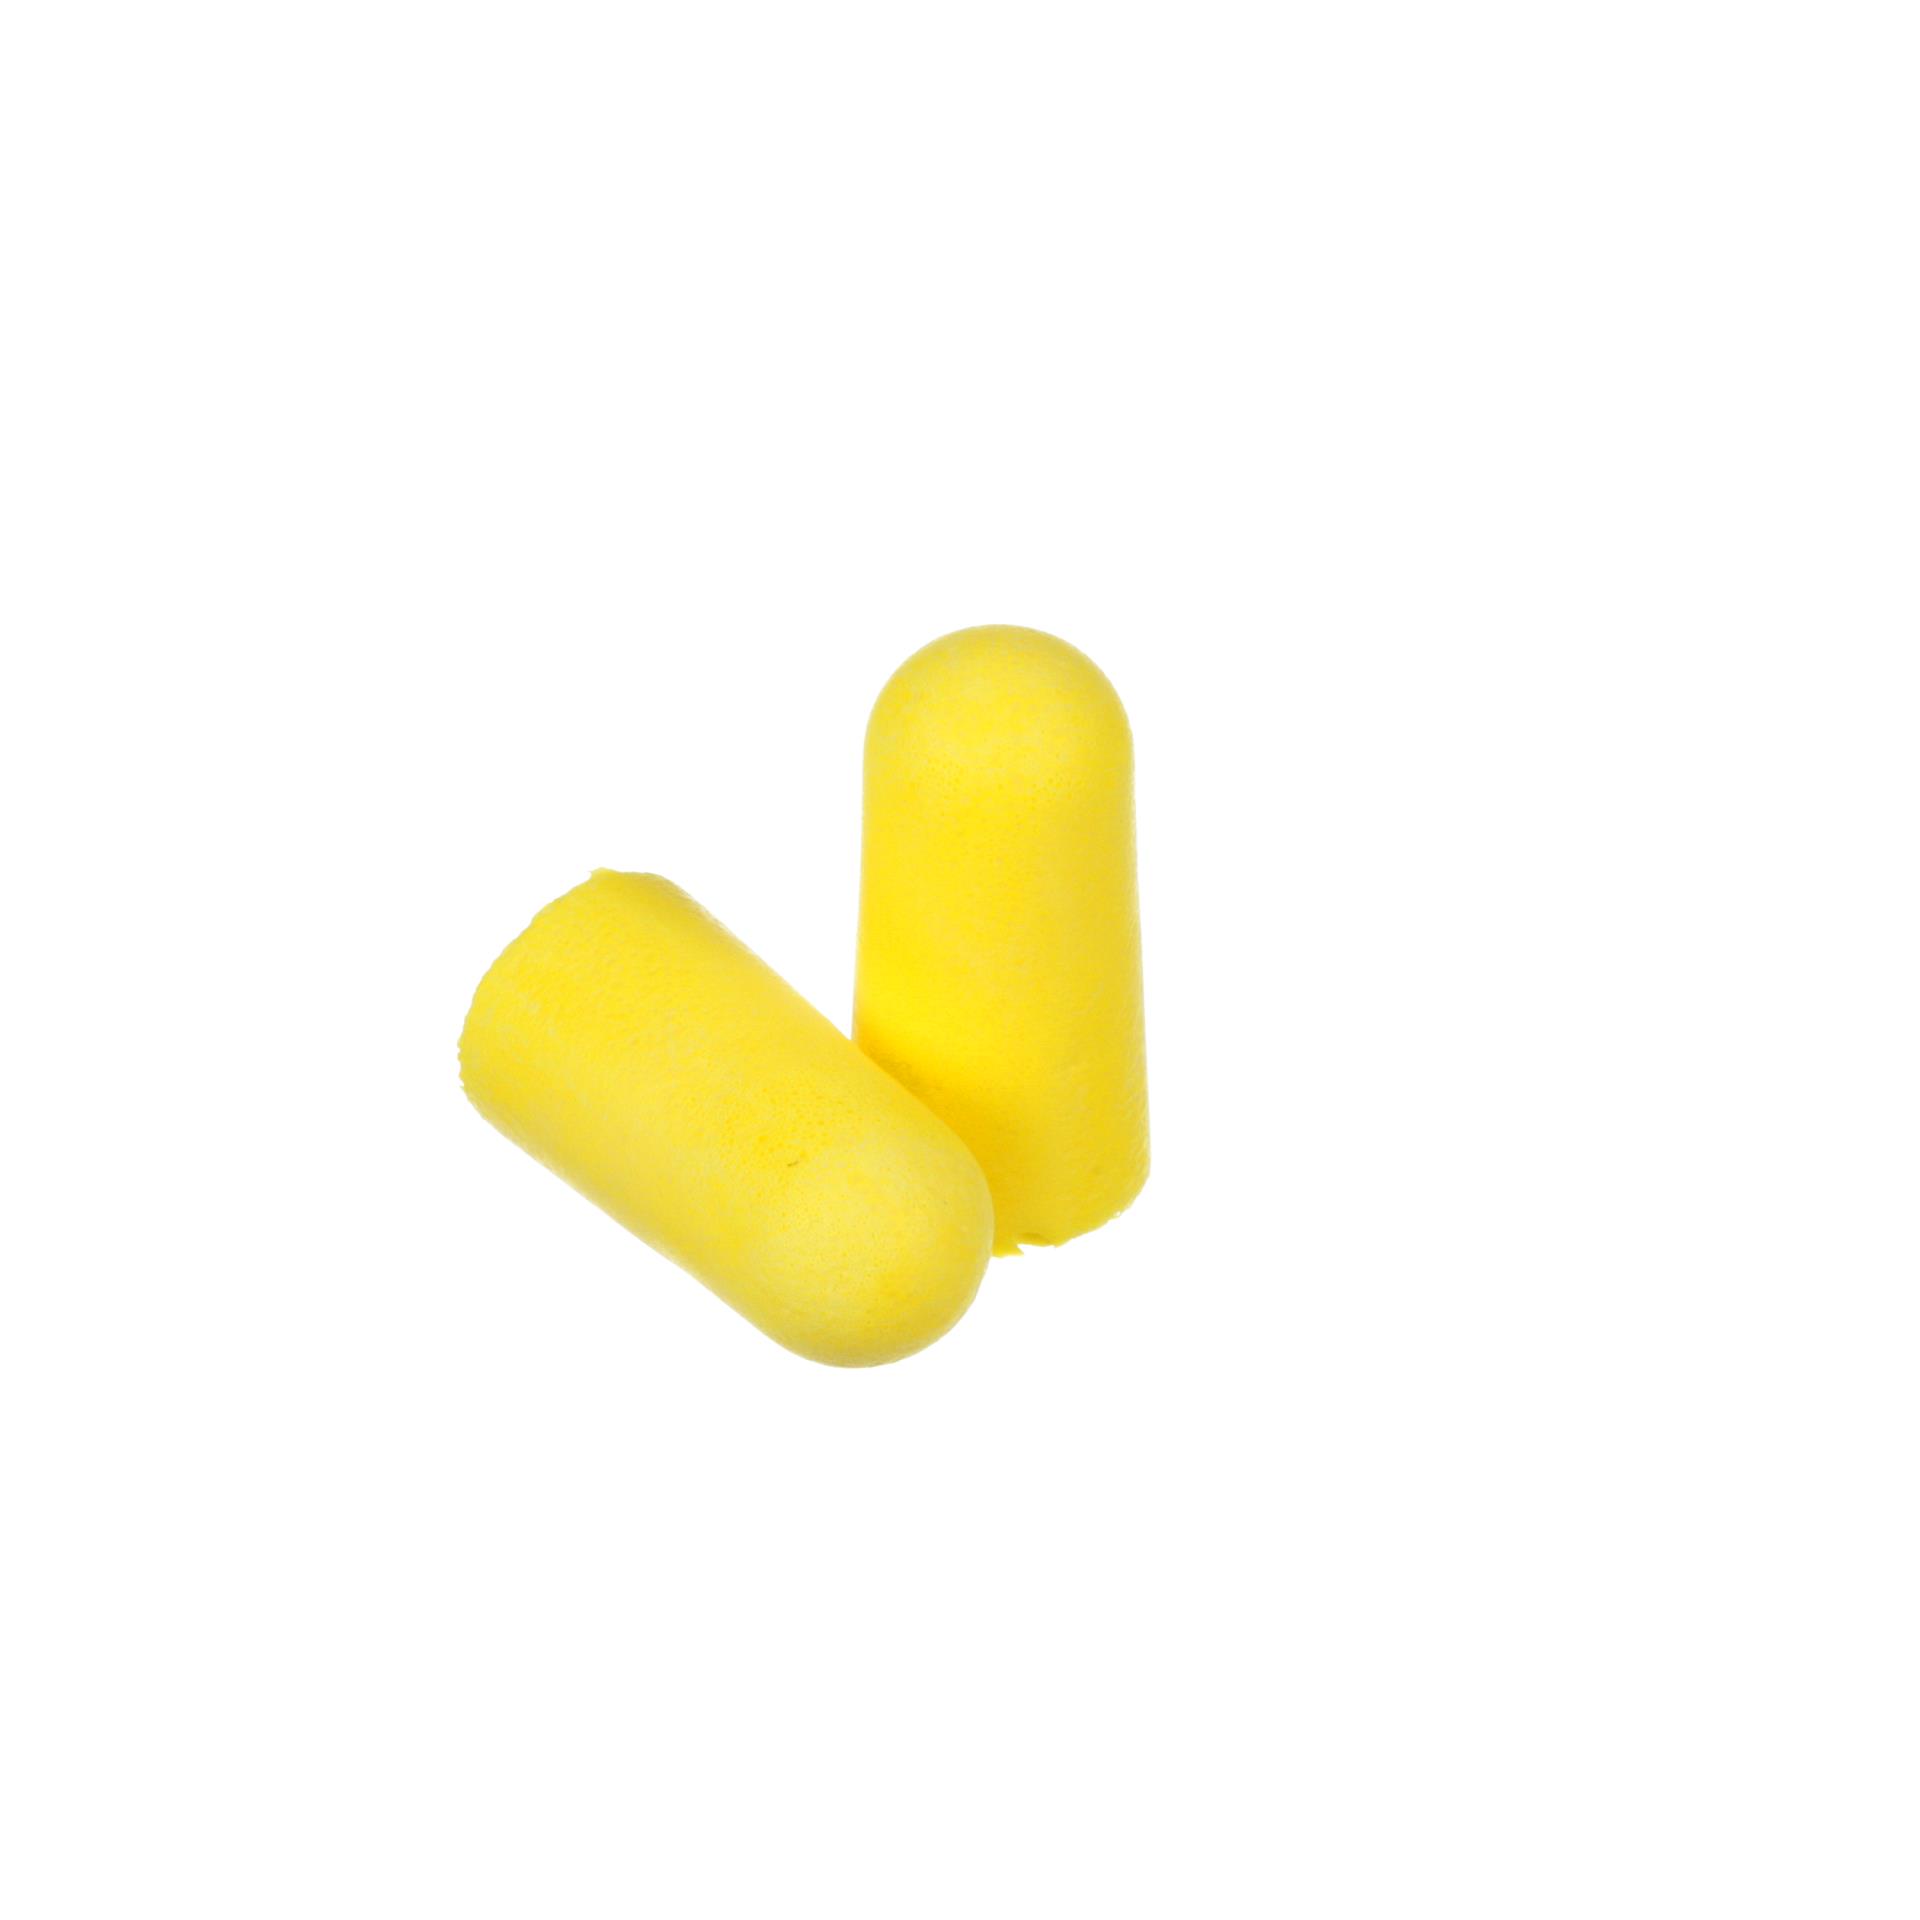 10080529120134 3M™ E-A-R™ TaperFit™ Earplugs 312-1219, Uncorded, Poly  Bag, Regular Size, 2000 Pair/Case Aircraft products earplugs 9340033